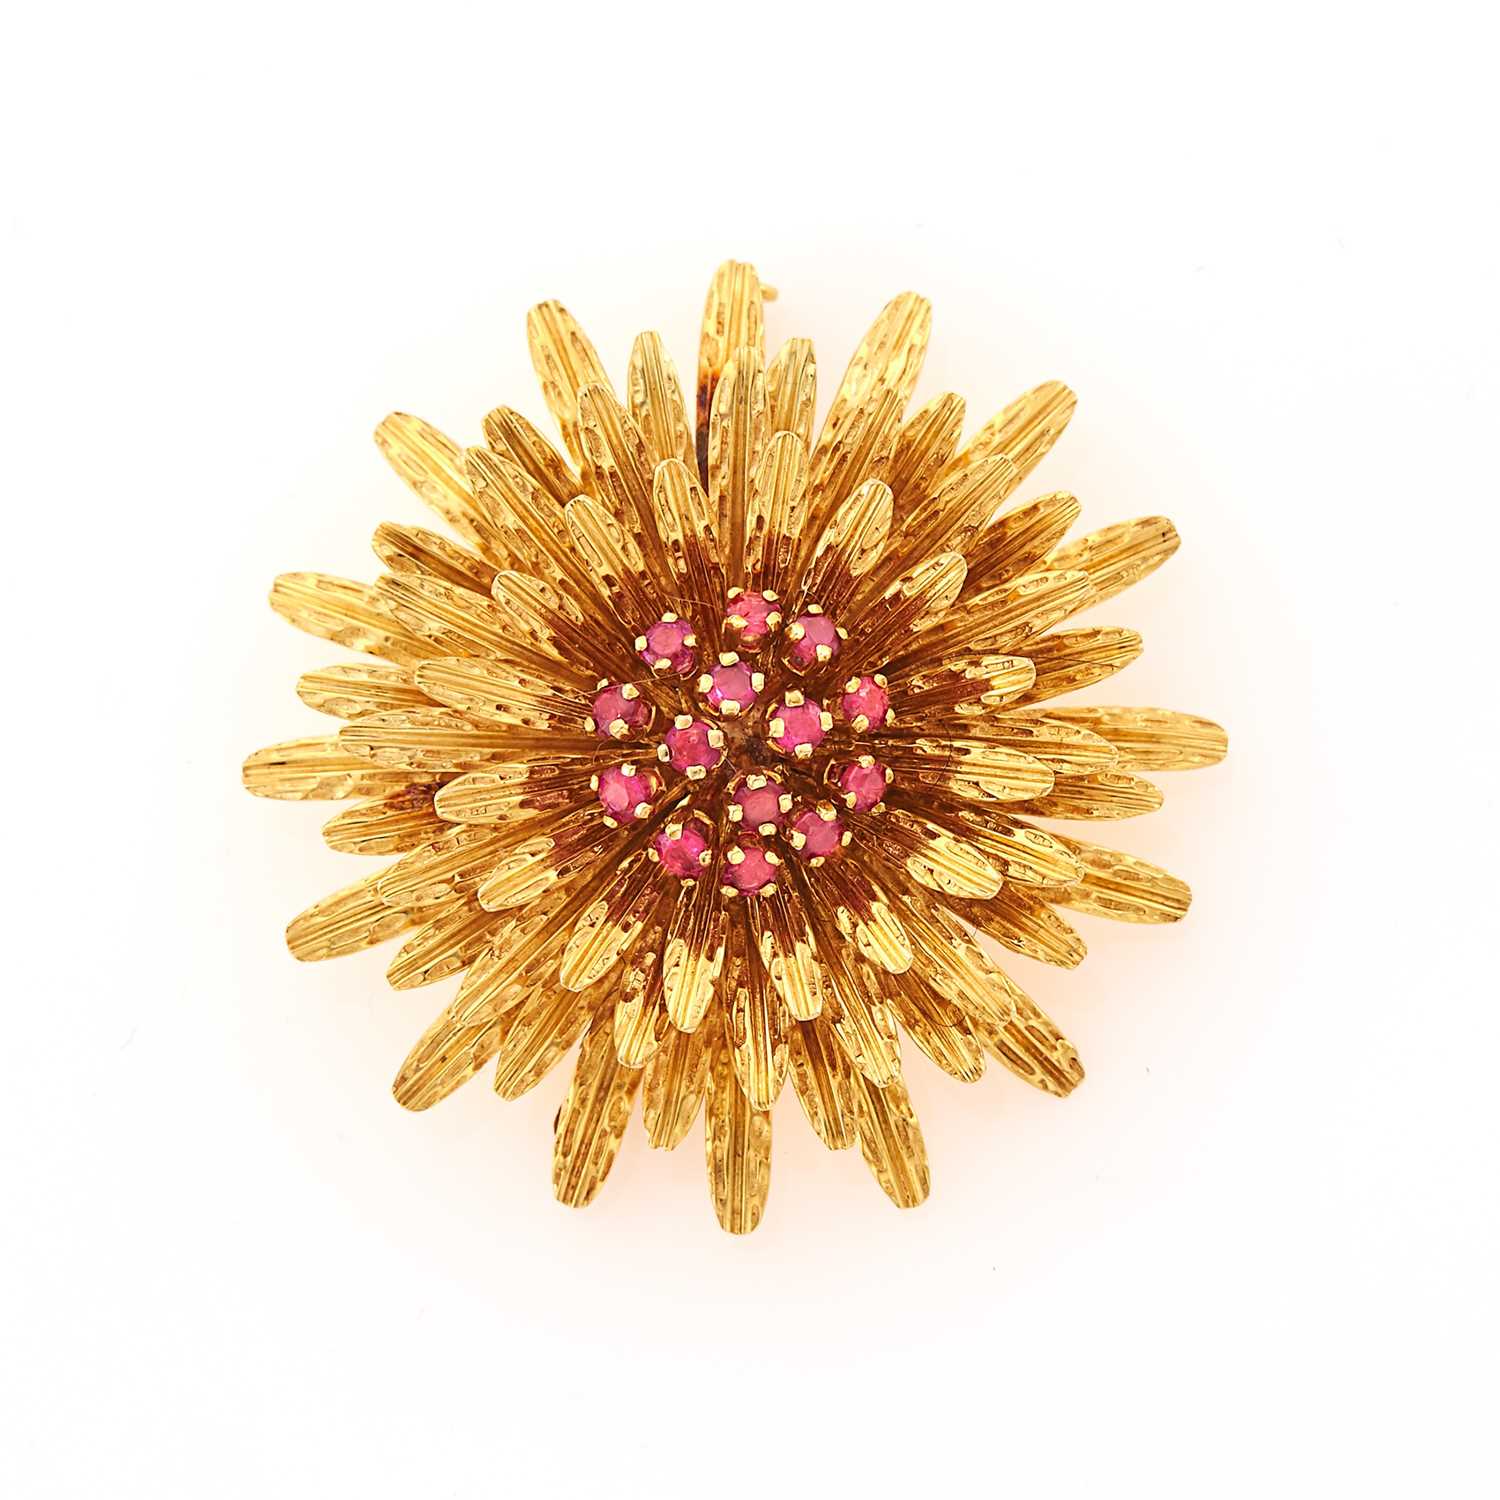 Lot 1009 - Tiffany & Co. Gold and Ruby Flower Brooch, France